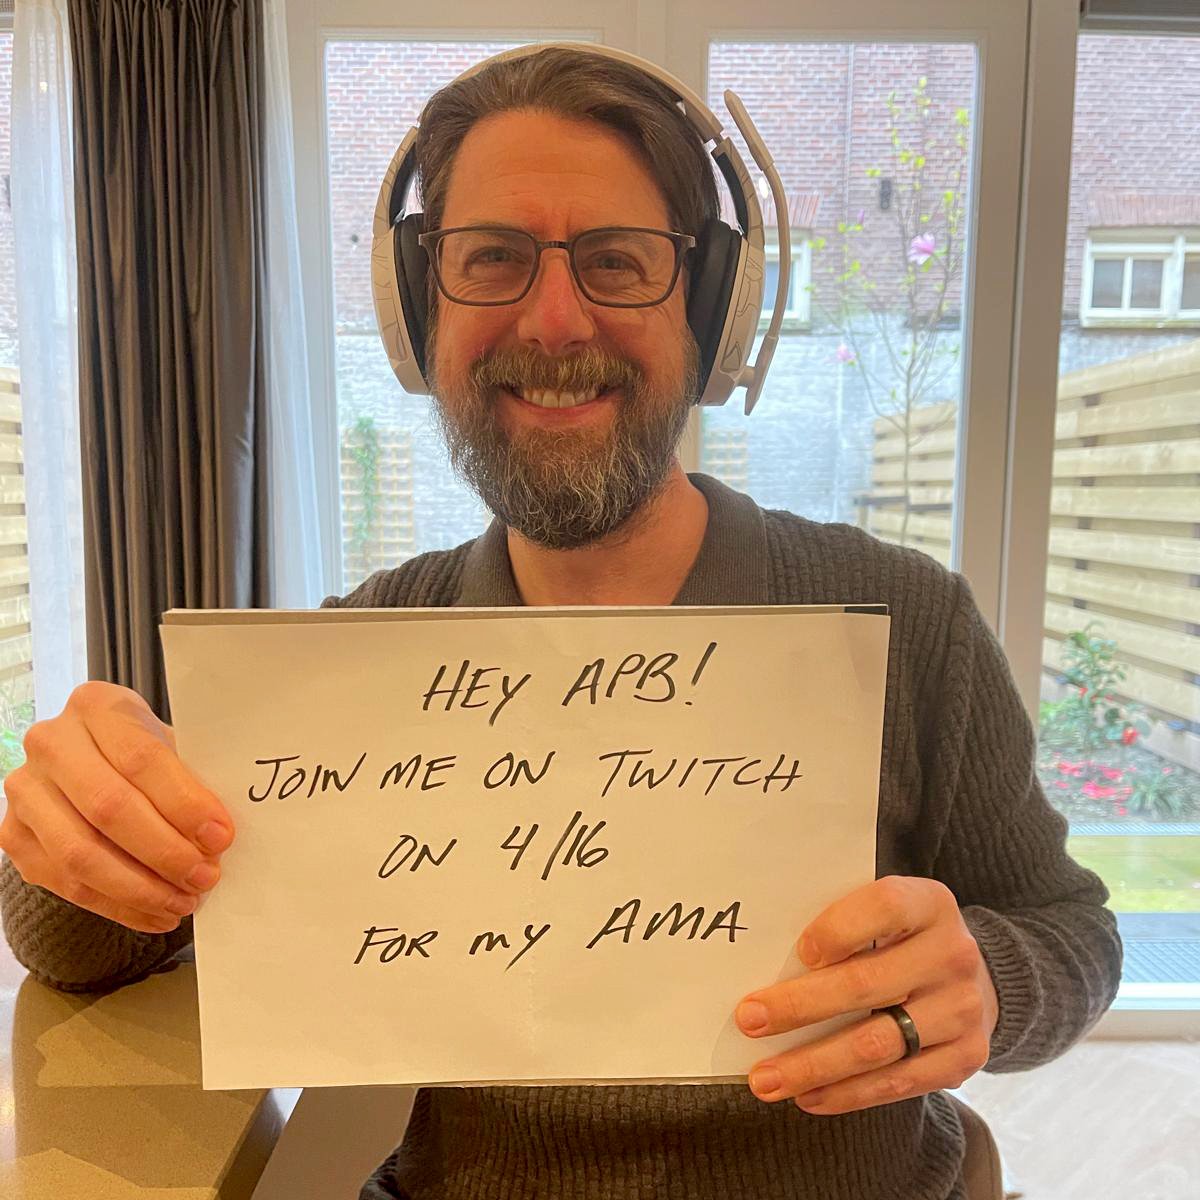 Mark your calendars📅for April 16th at 6 PM UTC and join us on twitch.tv/littleorbit for a live AMA session with our CEO, @mattpscott 🤵‍♂️

🔍 To submit your own questions, join our Discord server: discord.gg/littleorbit

See you all there!

#AMA #AskMatt #APB